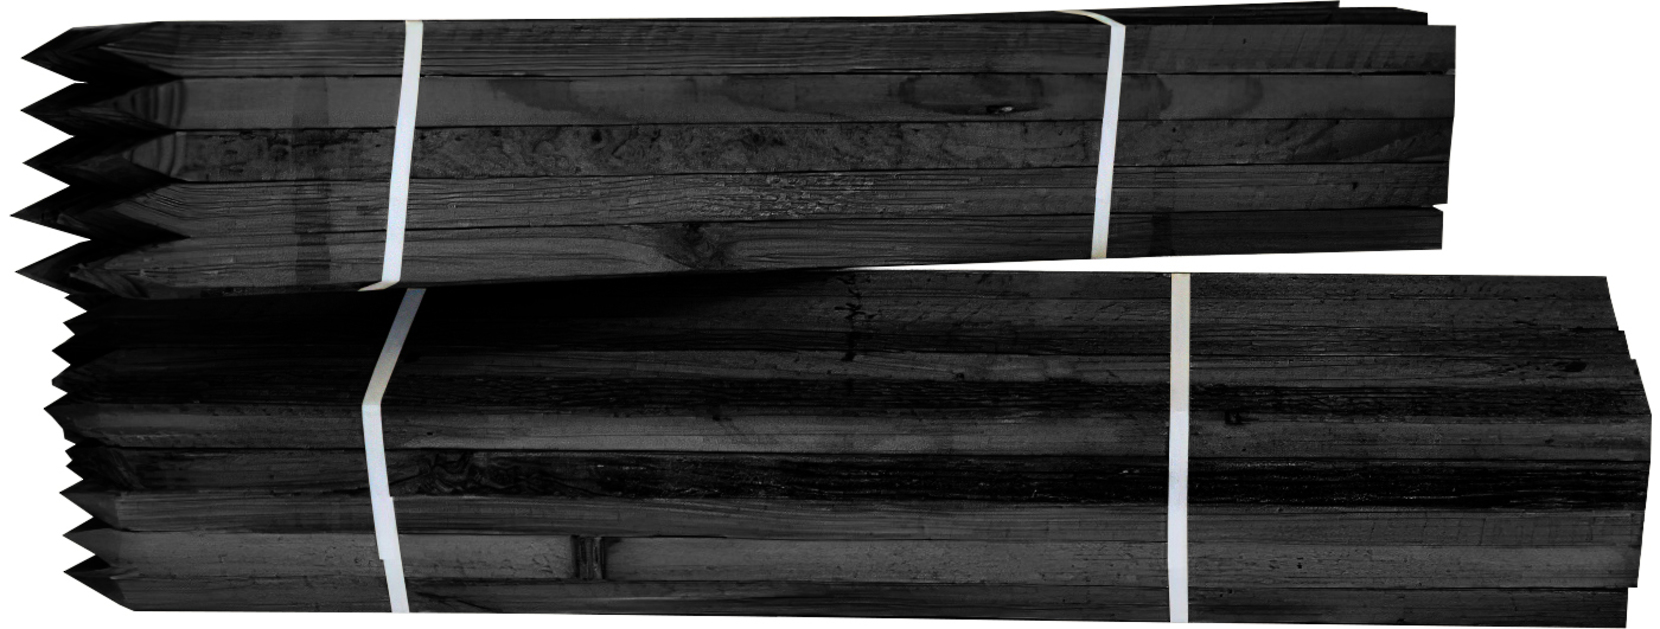 Treated Pine Stakes 50x50mm 20pk - Painted Black image 2